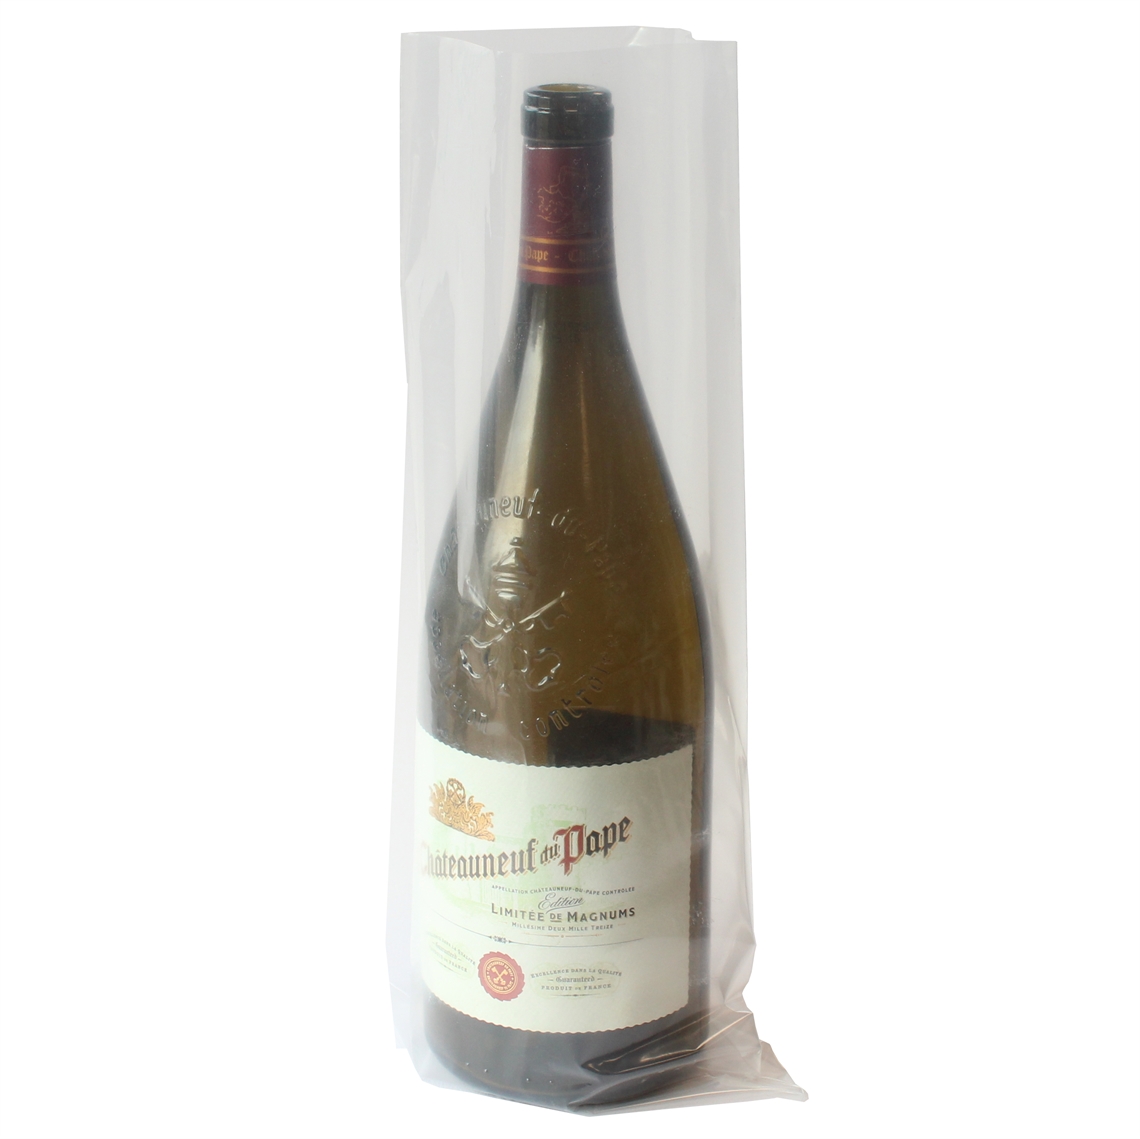 View more pulltex from our Wine Bottle Cellar Sleeves range